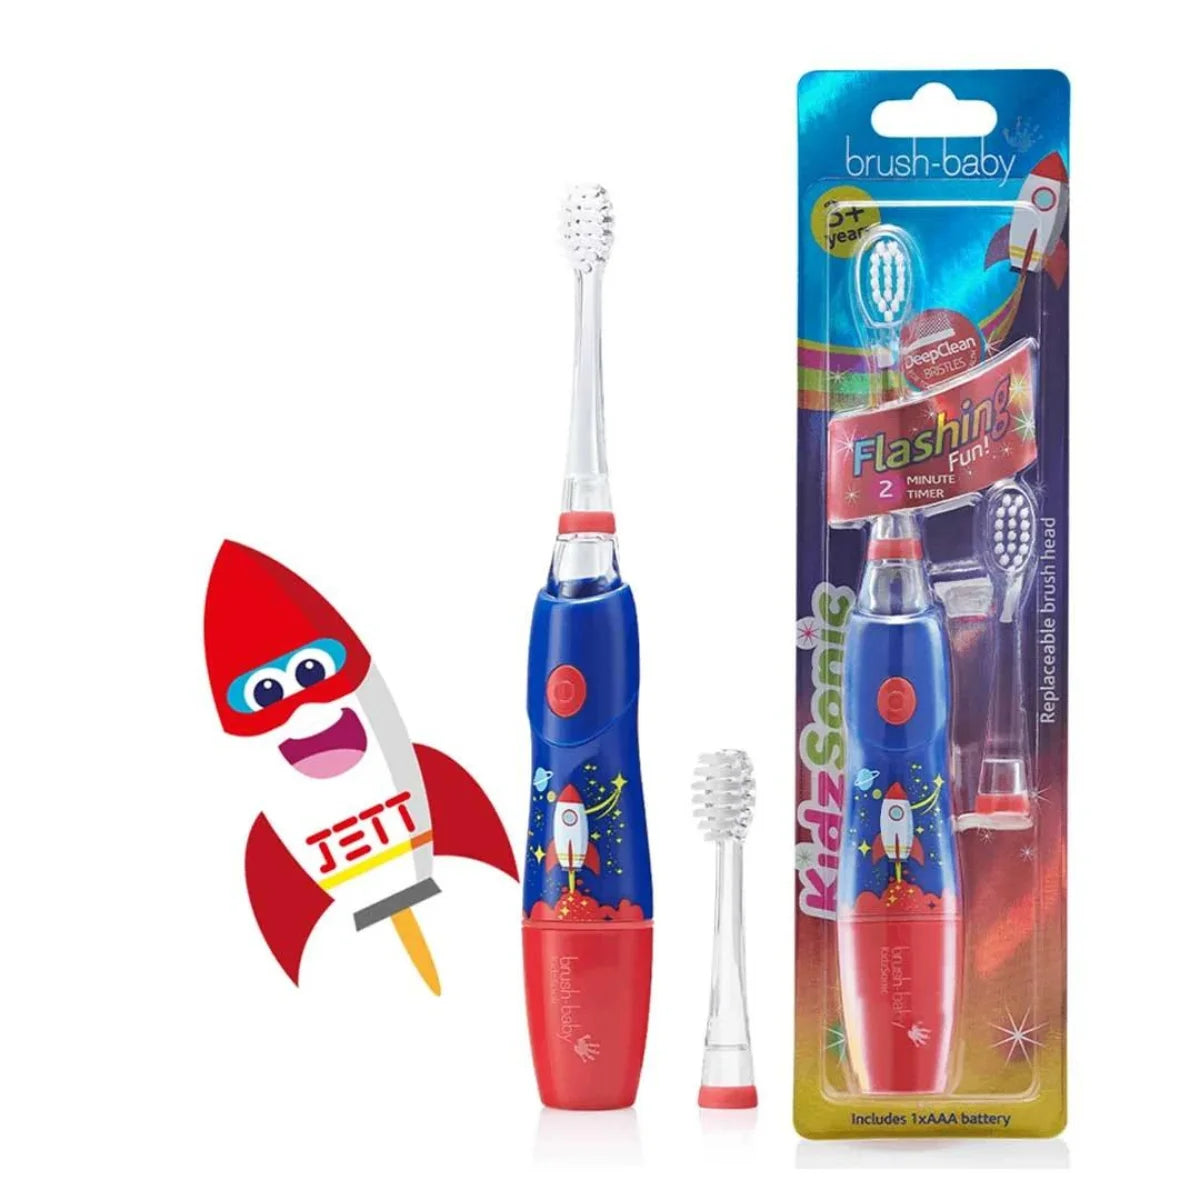 Jett the Rocket Kids Sonic Electric Toothbrush with replacement brush head